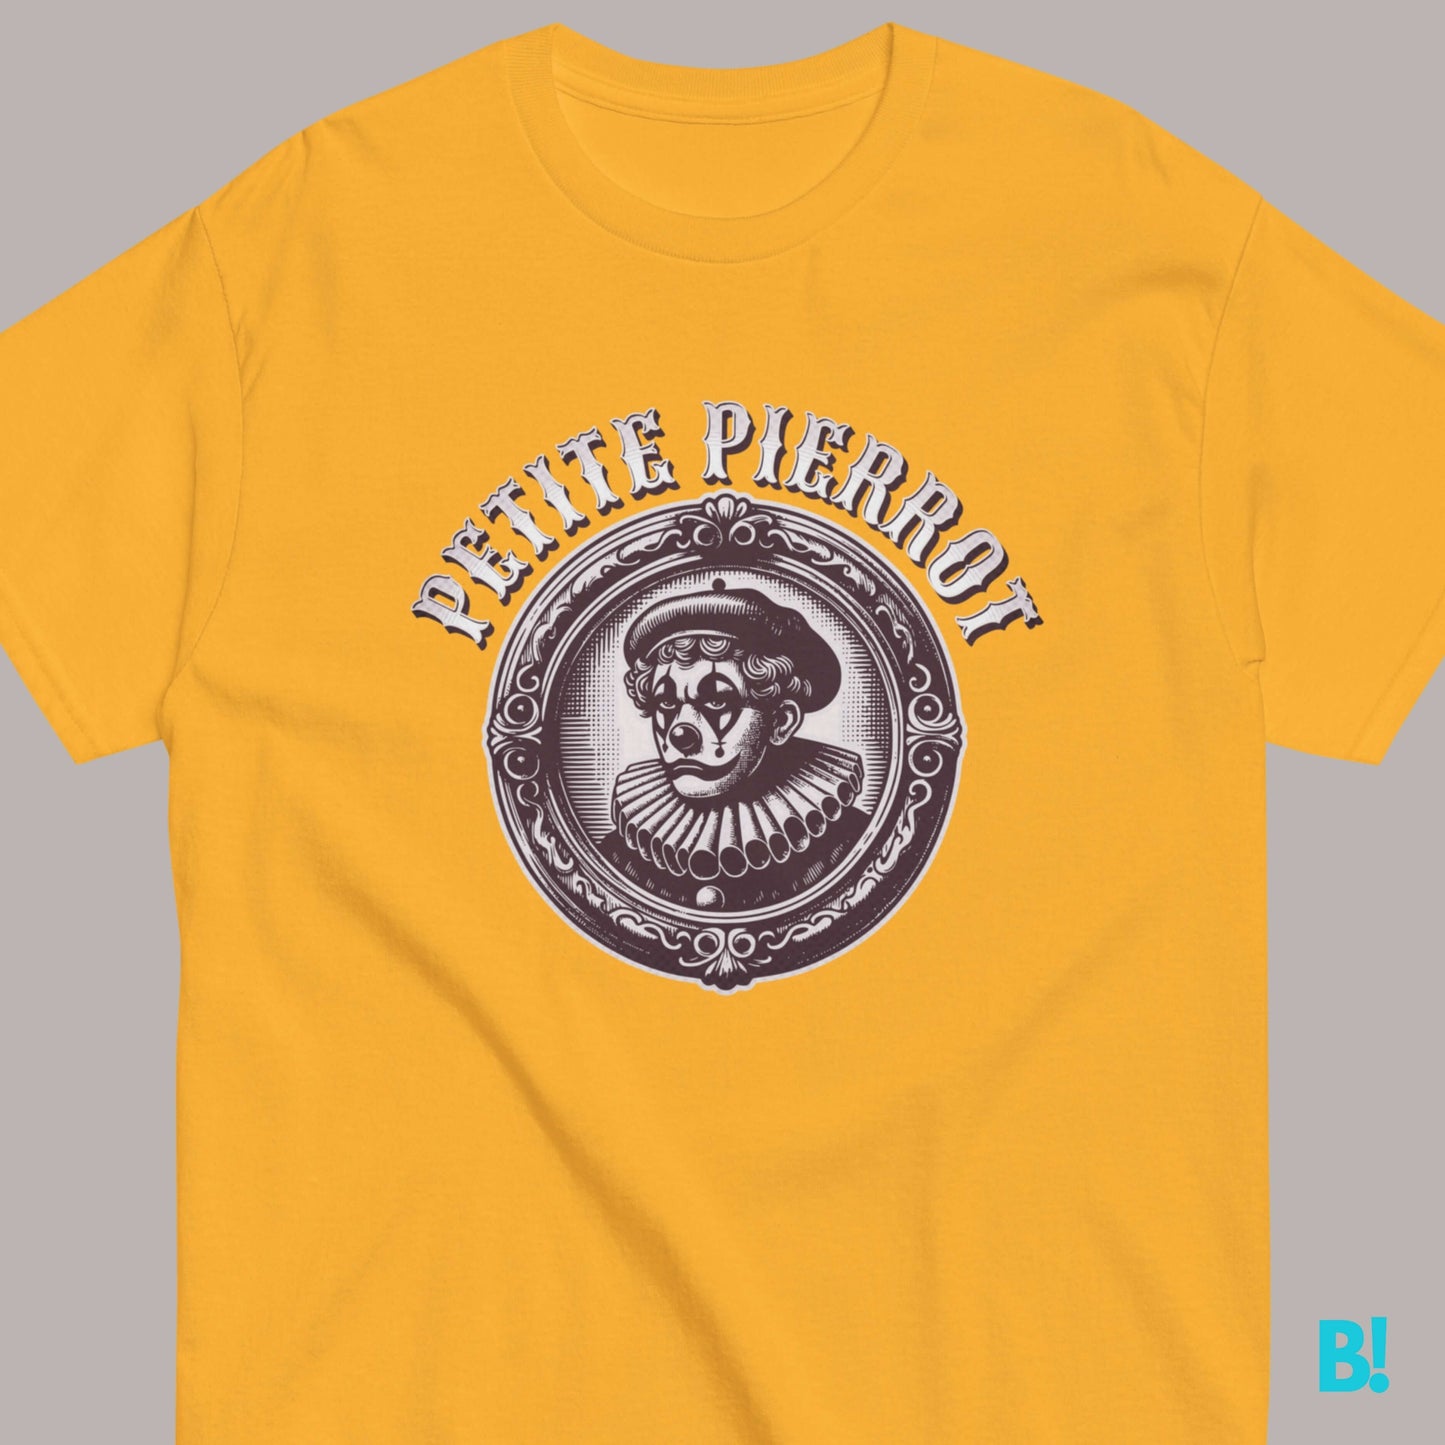 Petite Pierrot French Tattoo Retro Inspired Vintage T-Shirt Bonjour, dreamers! Step into a world of Petite Pierrot. This enchanting tee captures the magic of French circus charm with its playful design and colorful flair. Embrace your inner child join the